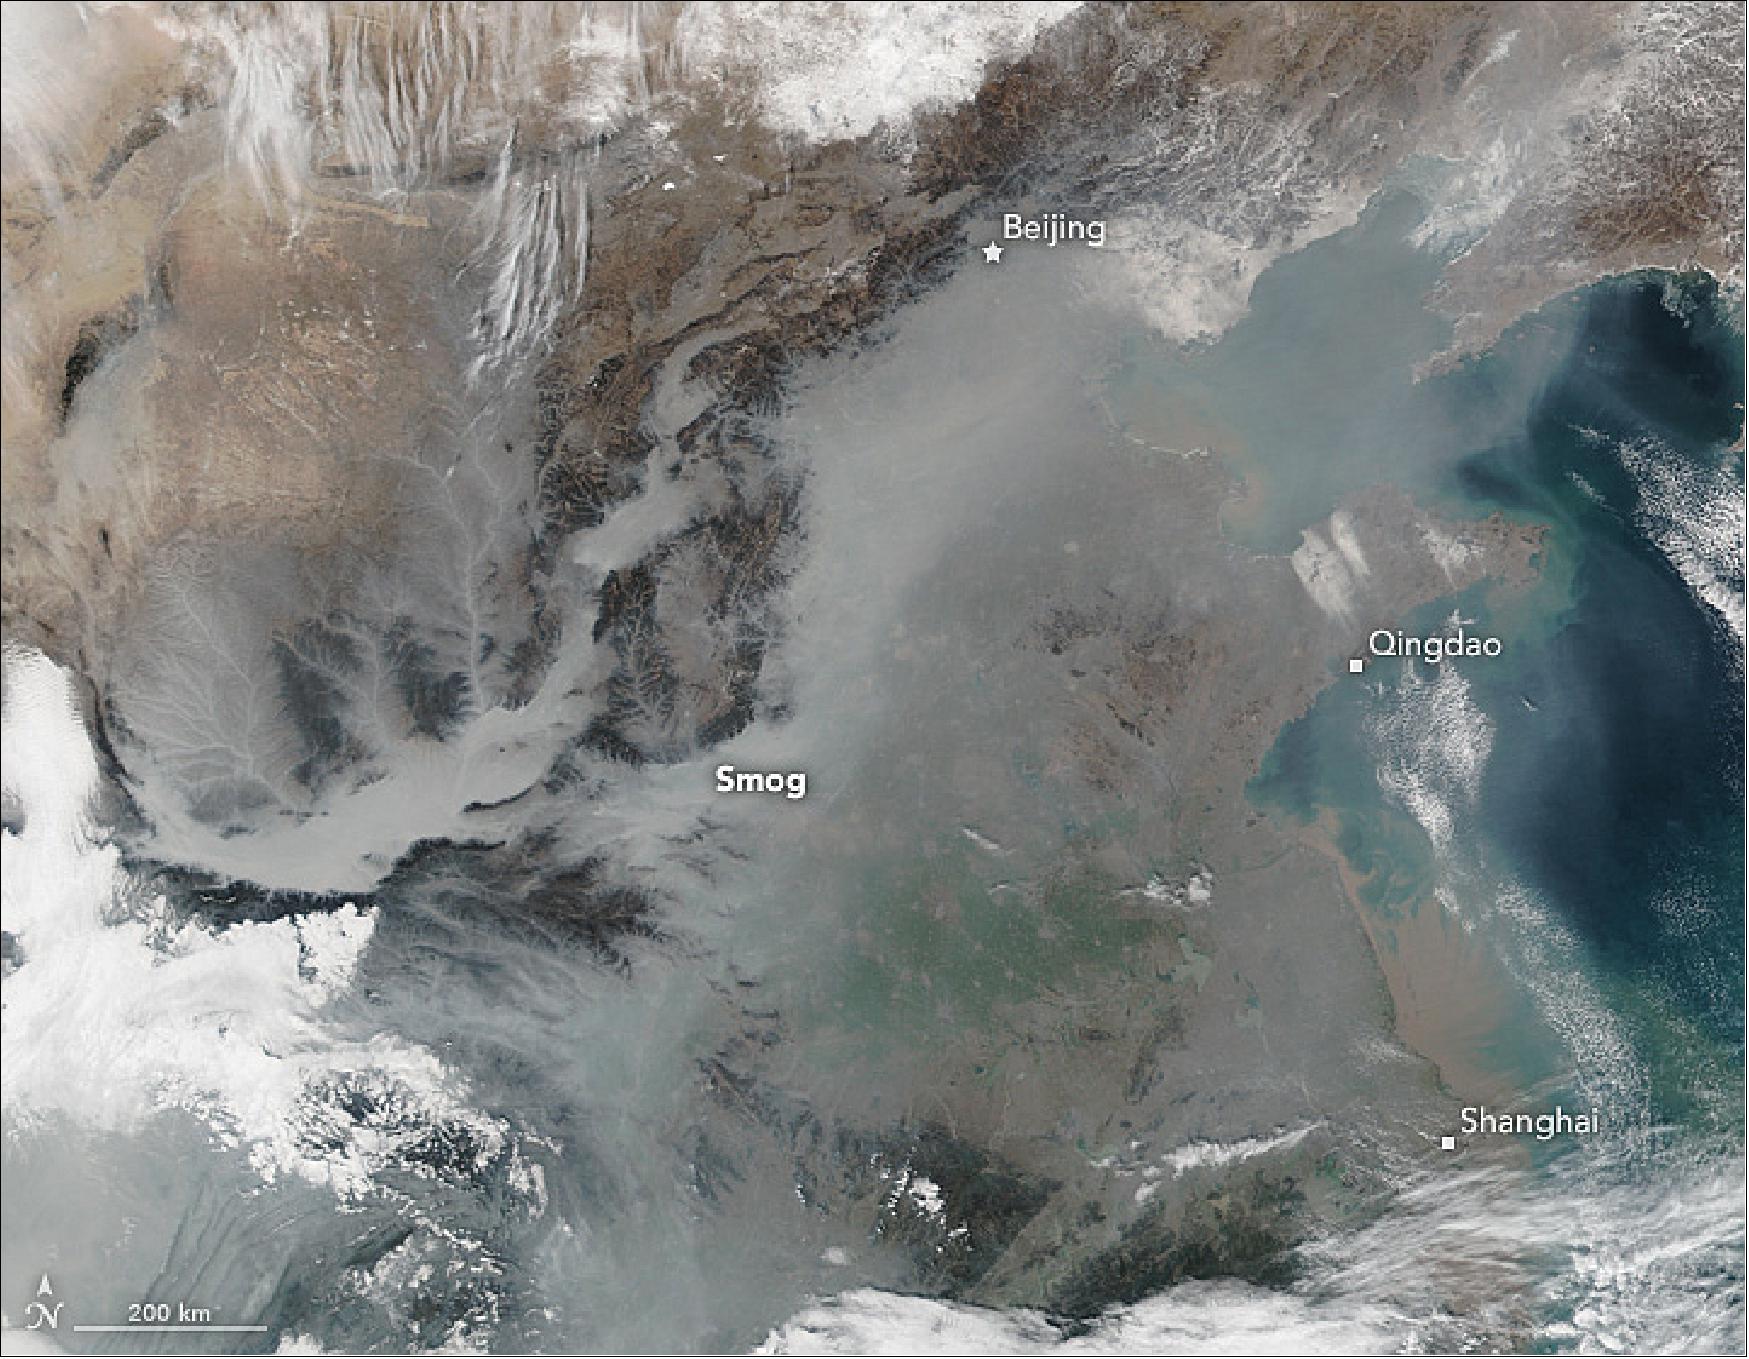 Figure 71: This natural-color image above shows thick haze over eastern China on January 25, 2017, as observed by the Visible Infrared Imaging Radiometer Suite (VIIRS) on the Suomi NPP satellite. Milky, gray smog blankets many of the valleys and lowlands. Atmospheric gases and pollutants are trapped near the surface in basins and valleys (image credit: NASA image by Jeff Schmaltz, LANCE/EOSDIS Rapid Response, story by Kasha Patel)